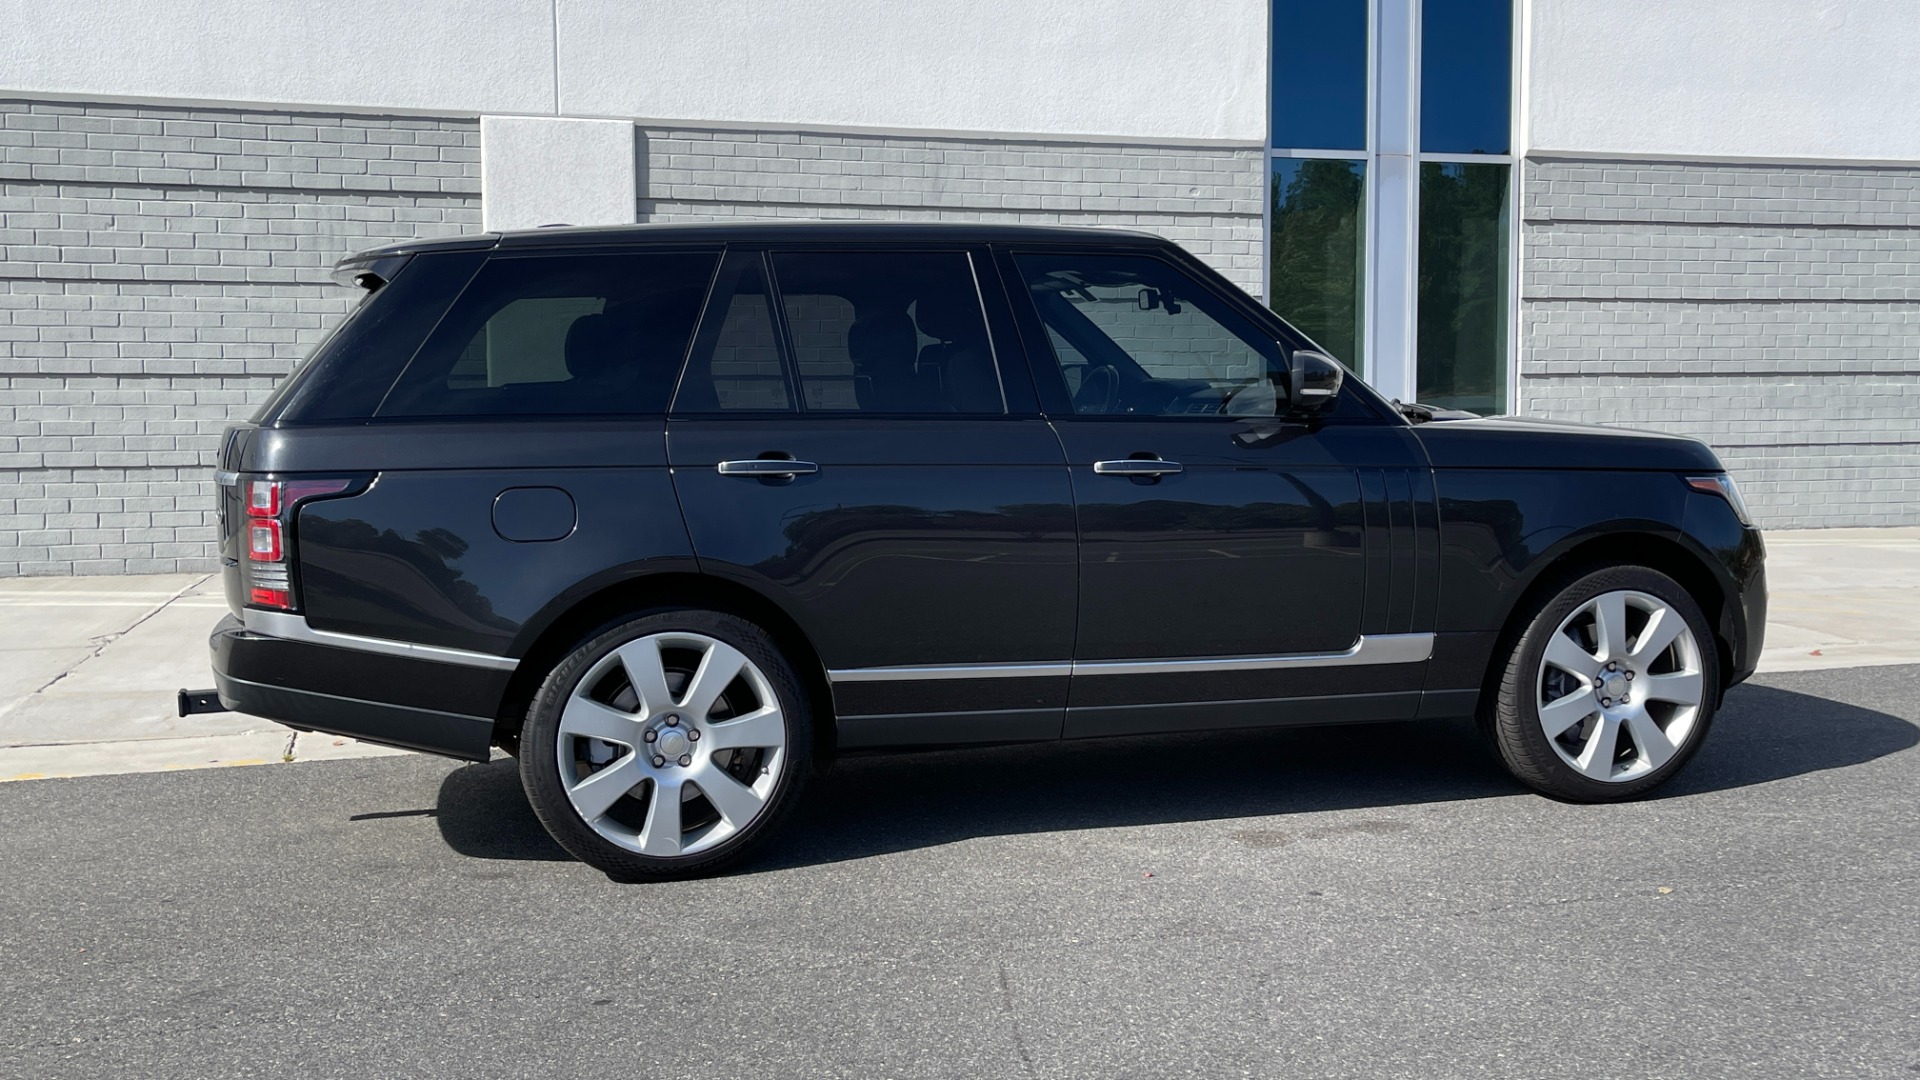 Used 2014 Land Rover Range Rover Supercharged Autobiography / 22IN WHEELS / PREMIUM PAINT / MASSAGE for sale $37,999 at Formula Imports in Charlotte NC 28227 8